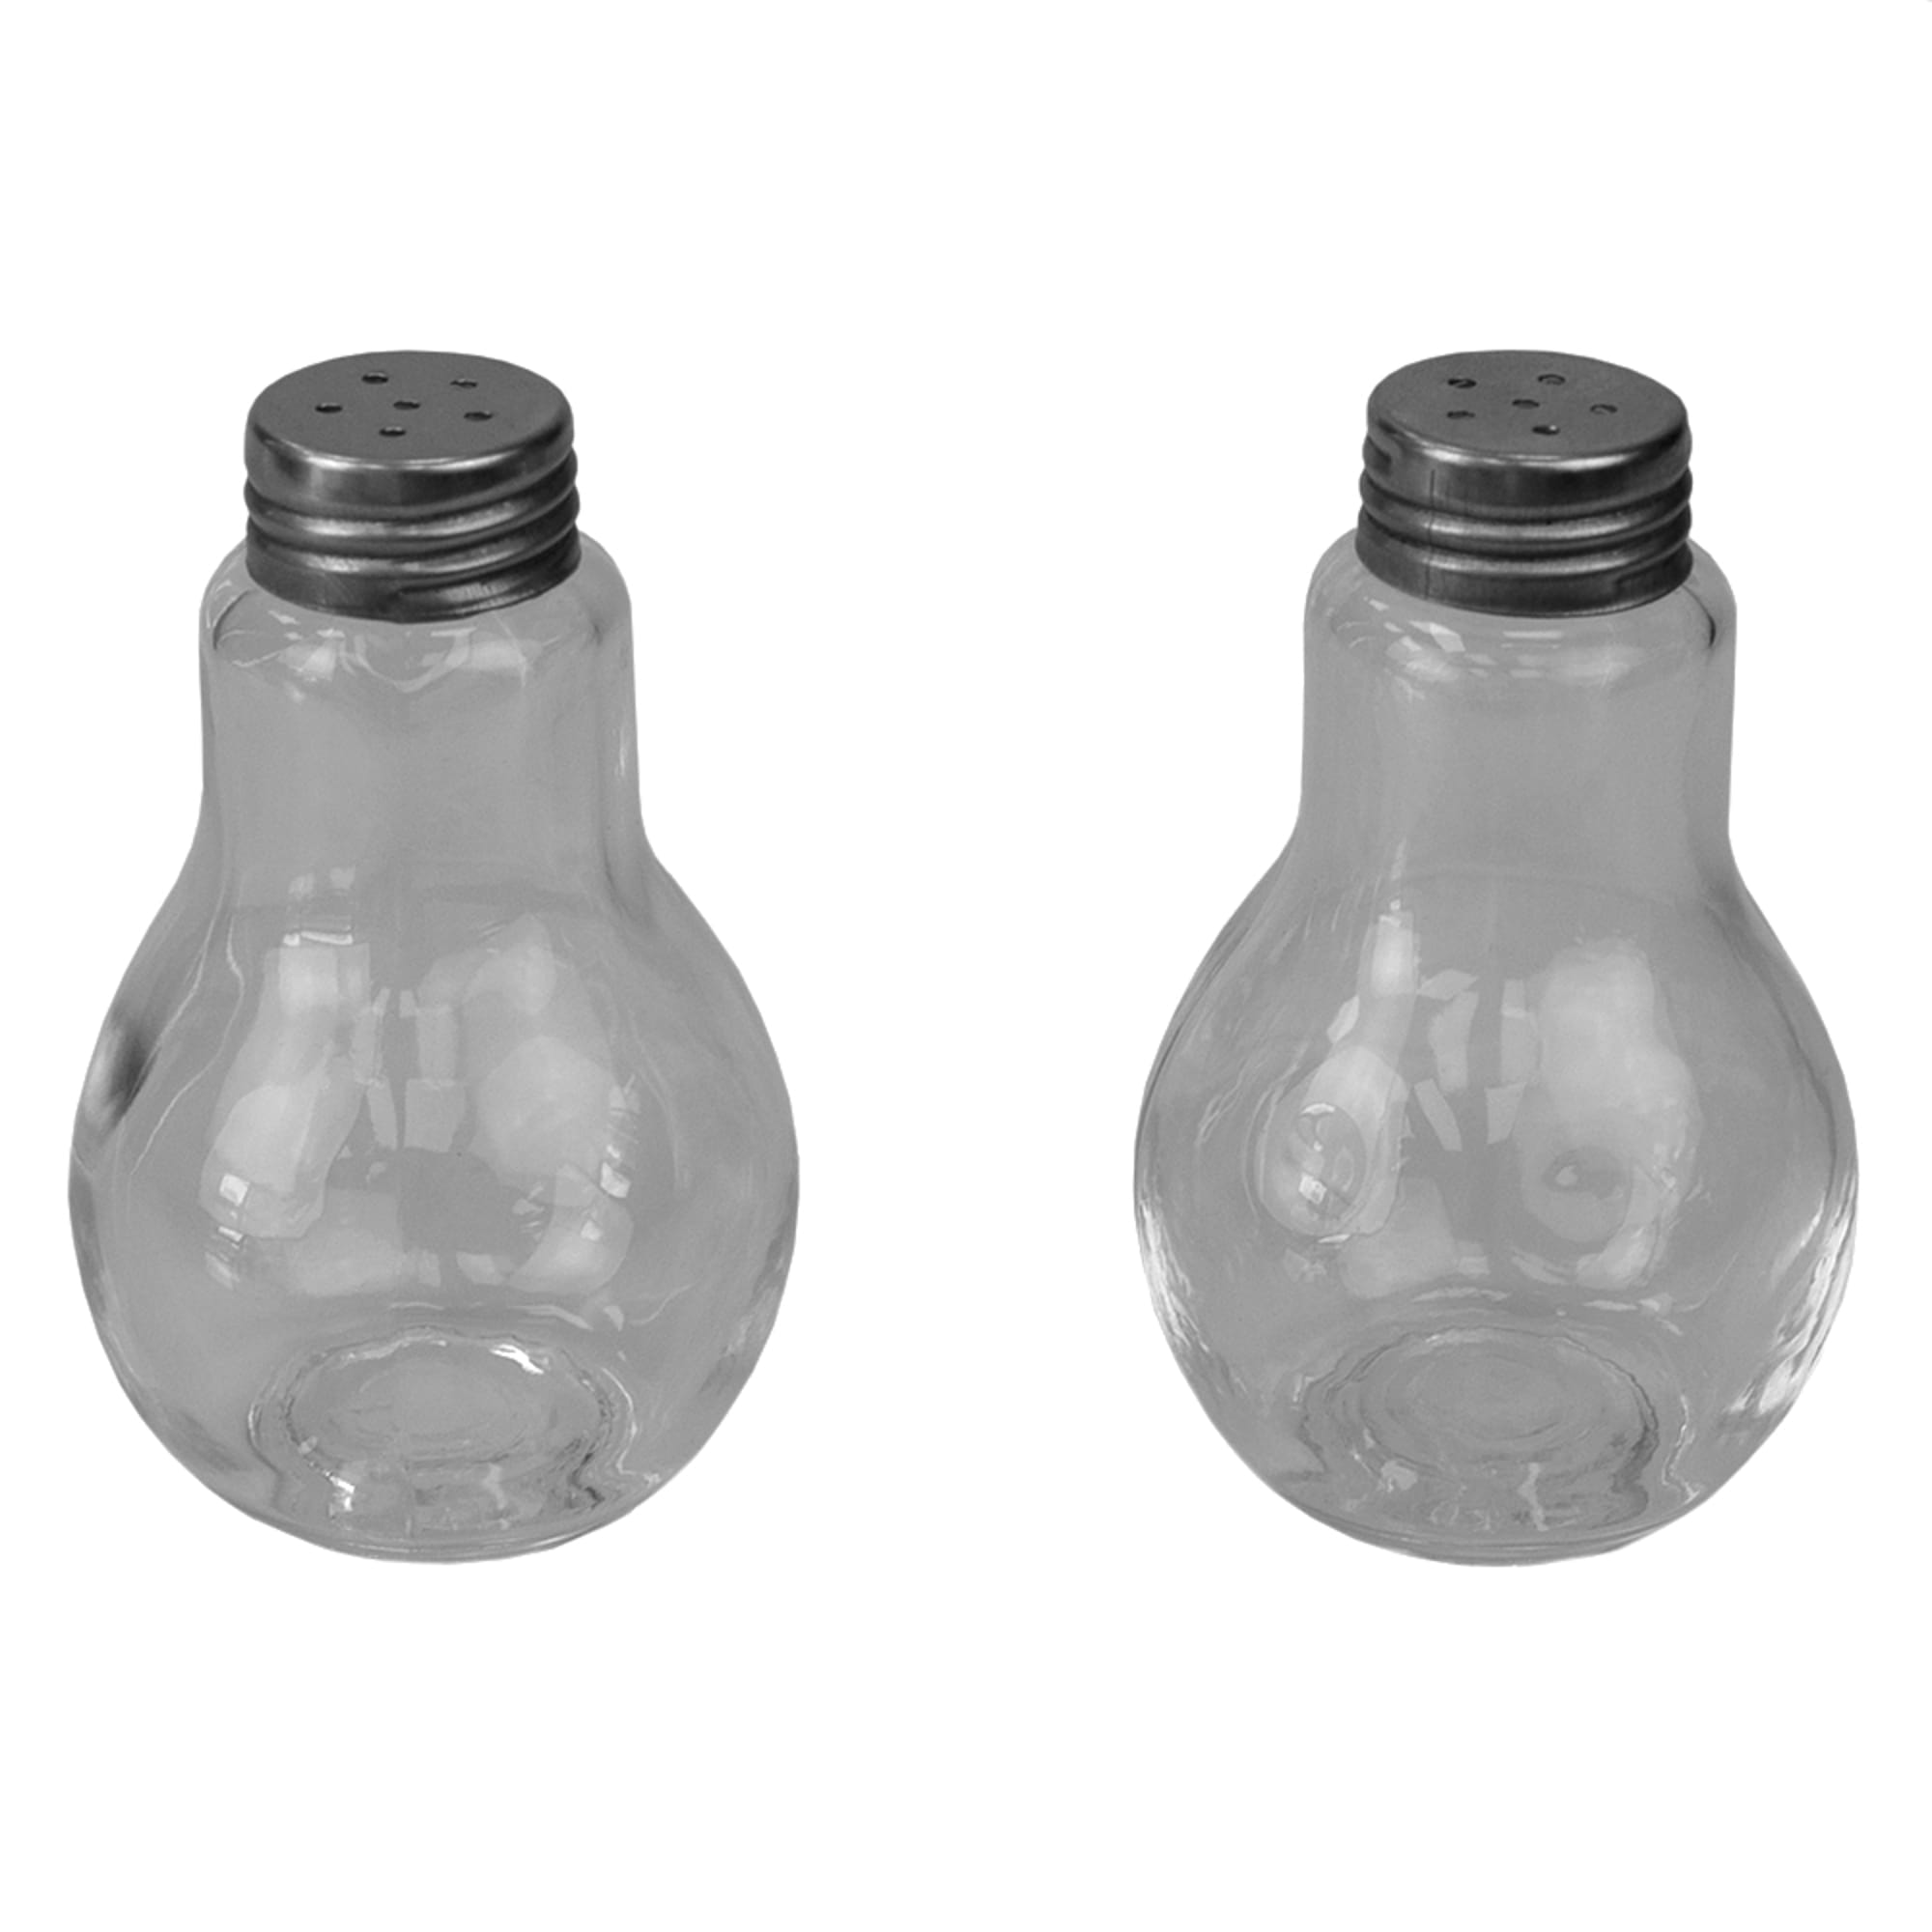 Home Basics 3.8 oz. Bulb Shape Glass Tabletop Salt and Pepper Shaker with Perforated Stainless Steel Tops, Clear $2.00 EACH, CASE PACK OF 24